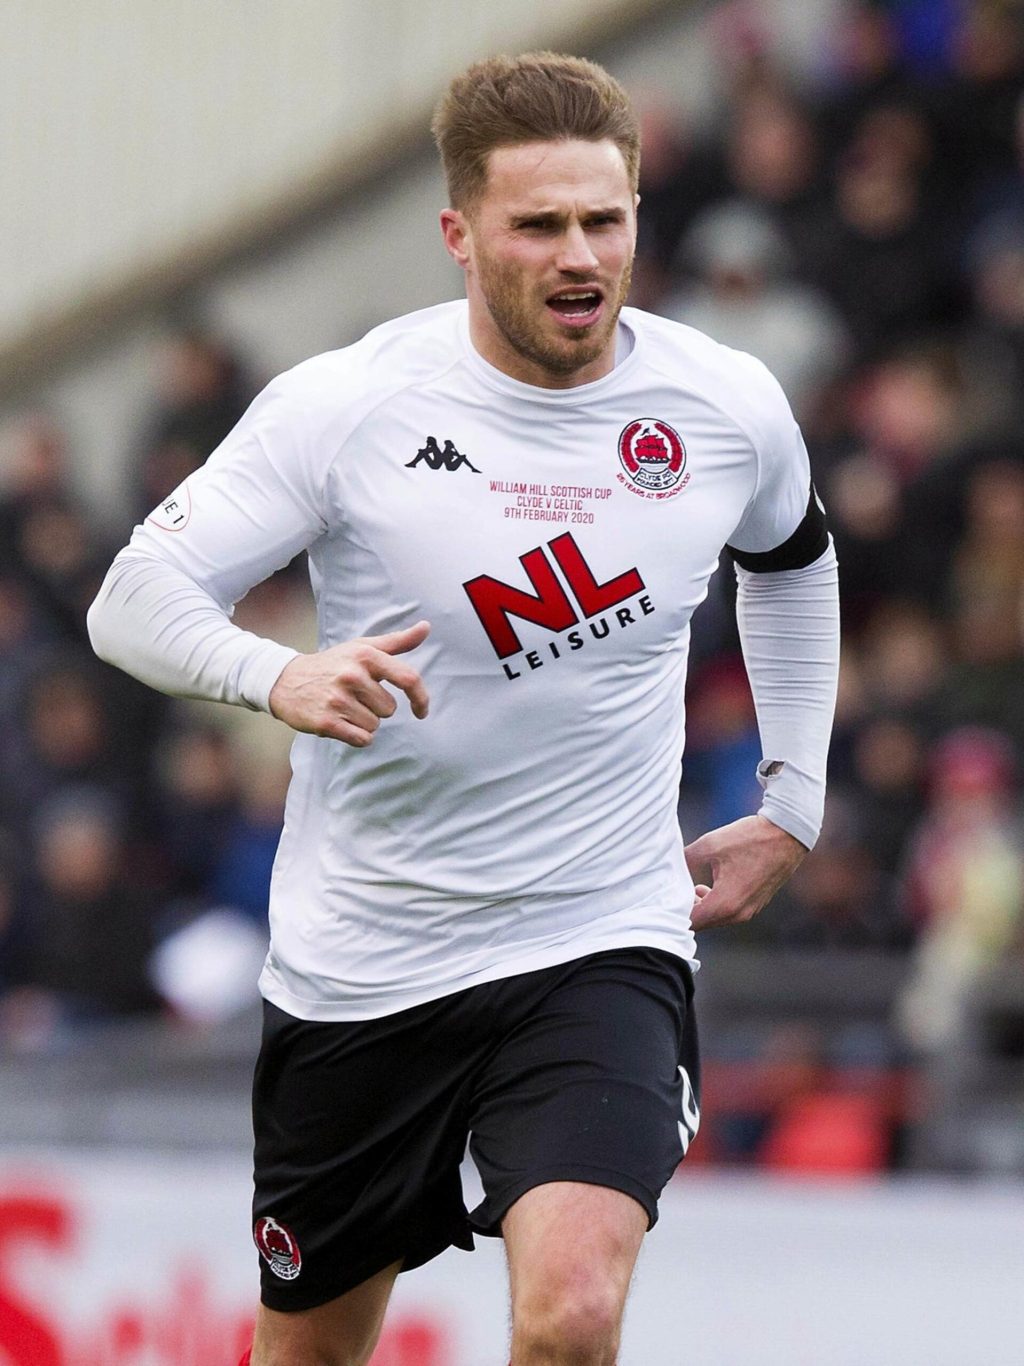 The Goodwillie Circus and How This Can Be Avoided Going Forward